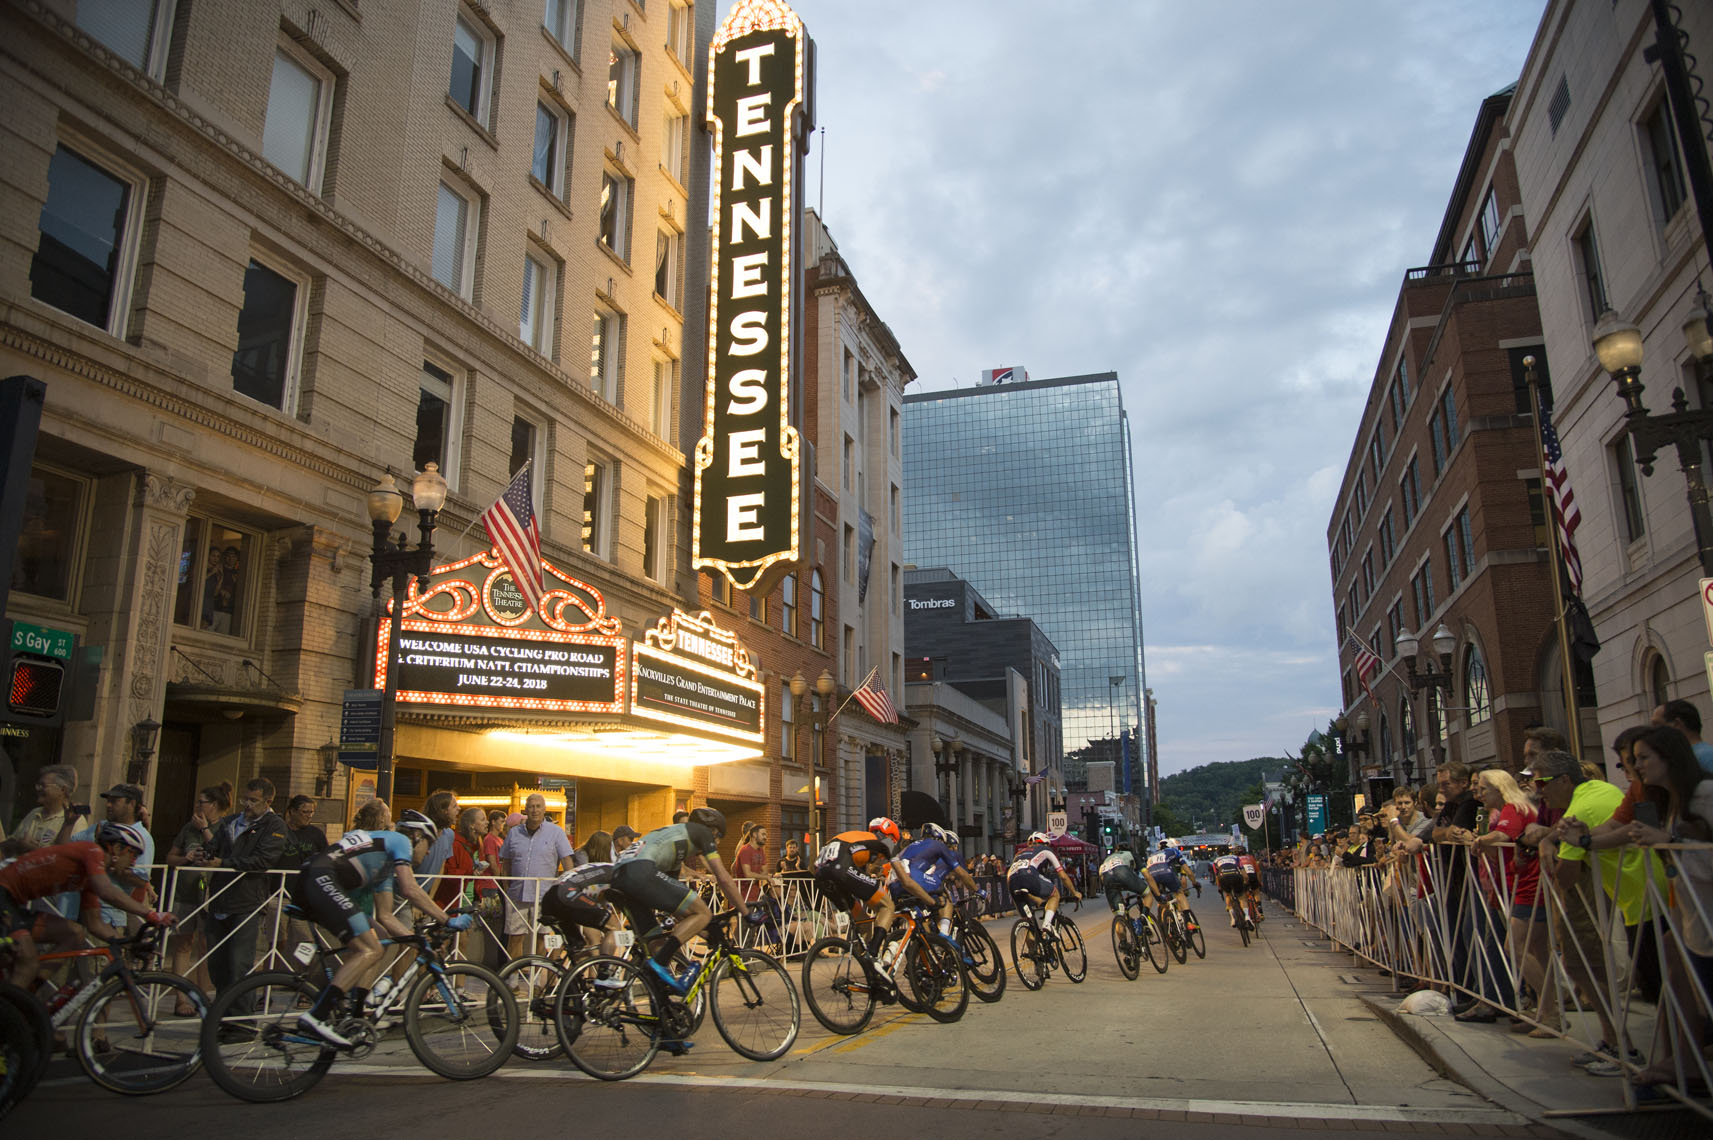 National Criterium Cycling Championships, Tennessee Theatre, Knoxville, TN